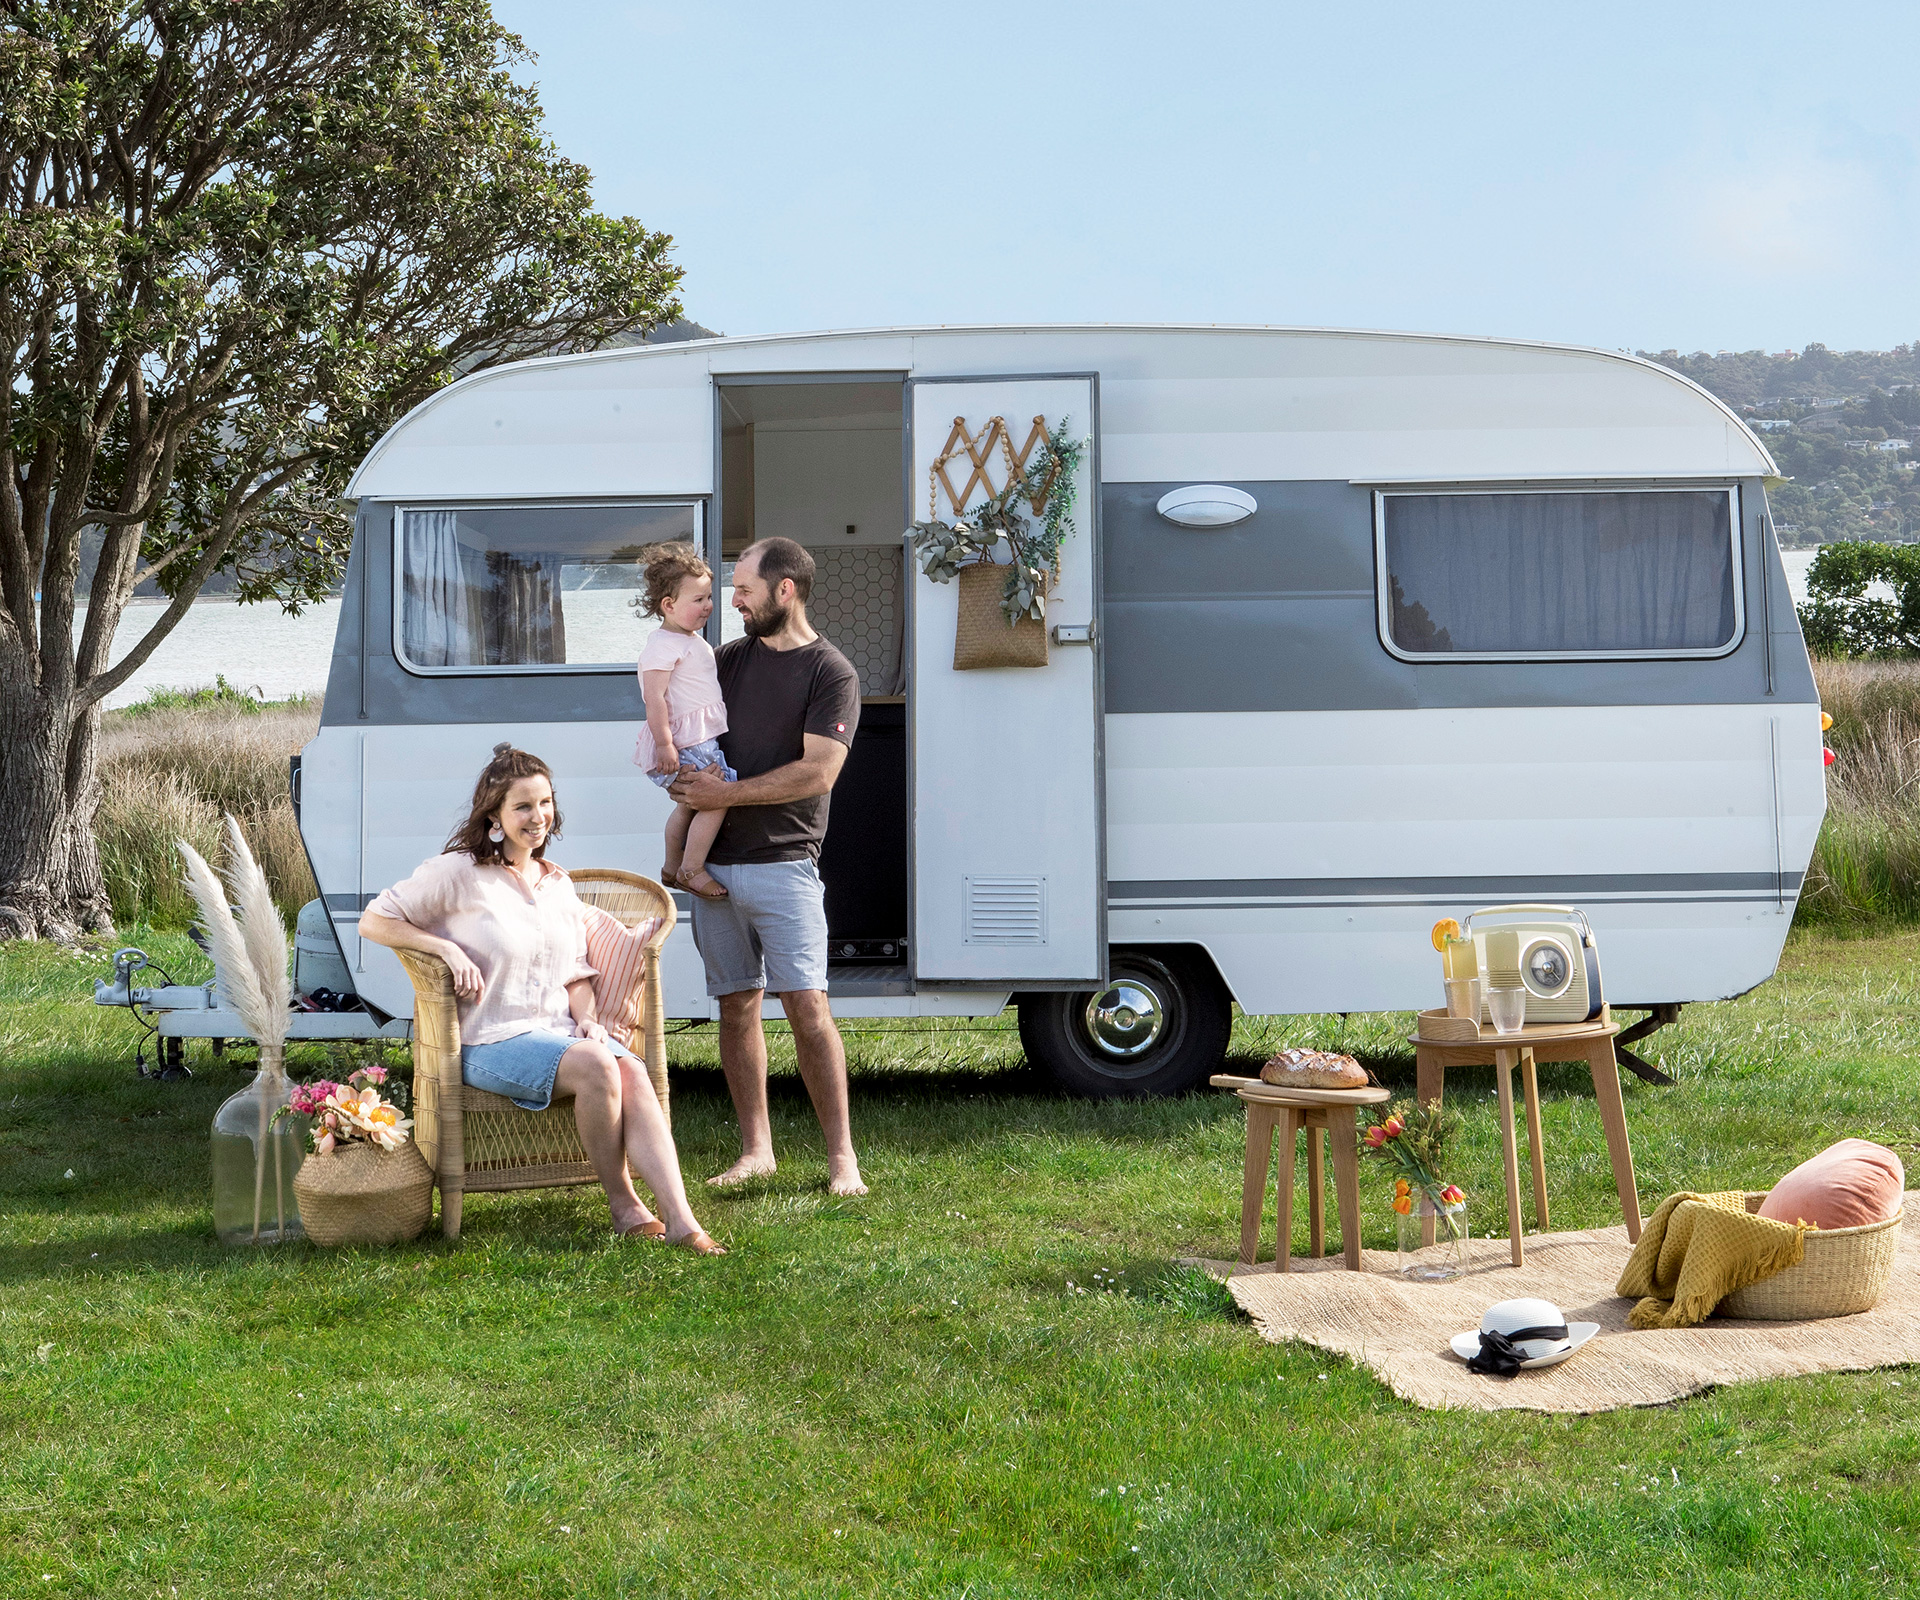 This Sweet Little Caravan Has Been Given The Most Stylish